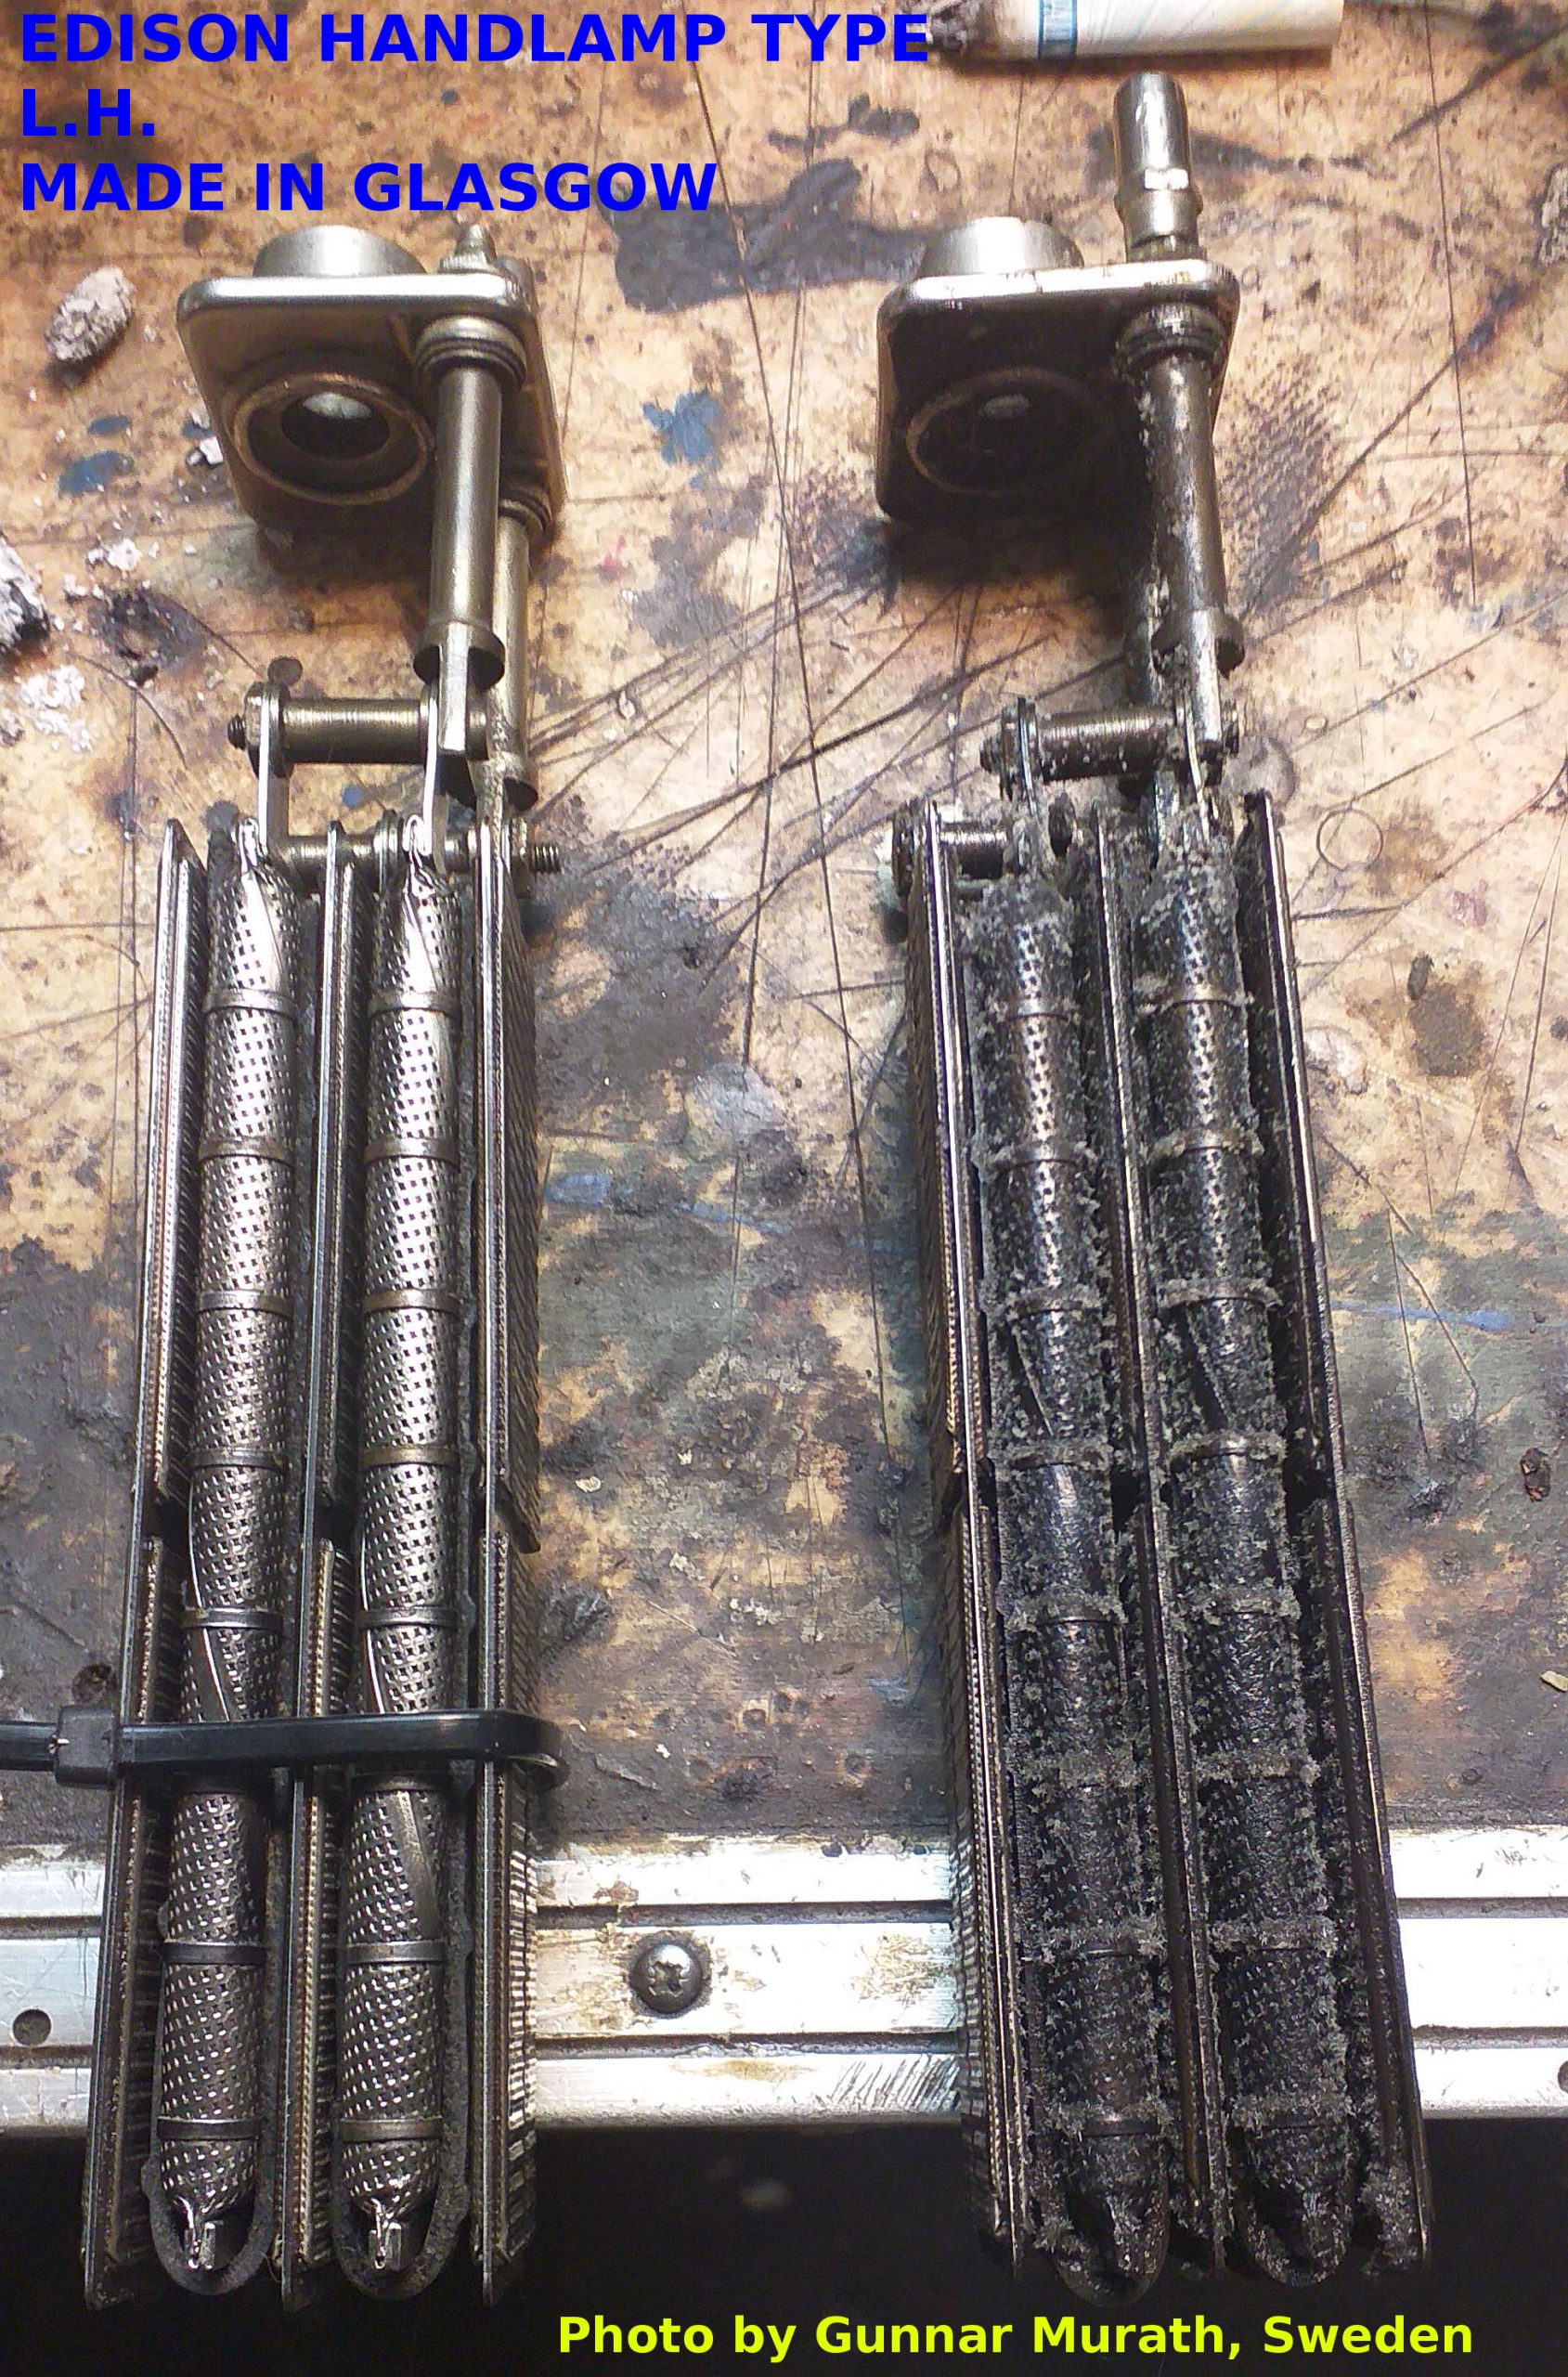 The iron negative plates are shown bare, while the rubber containers, which used to carry electrolyte, have been removed